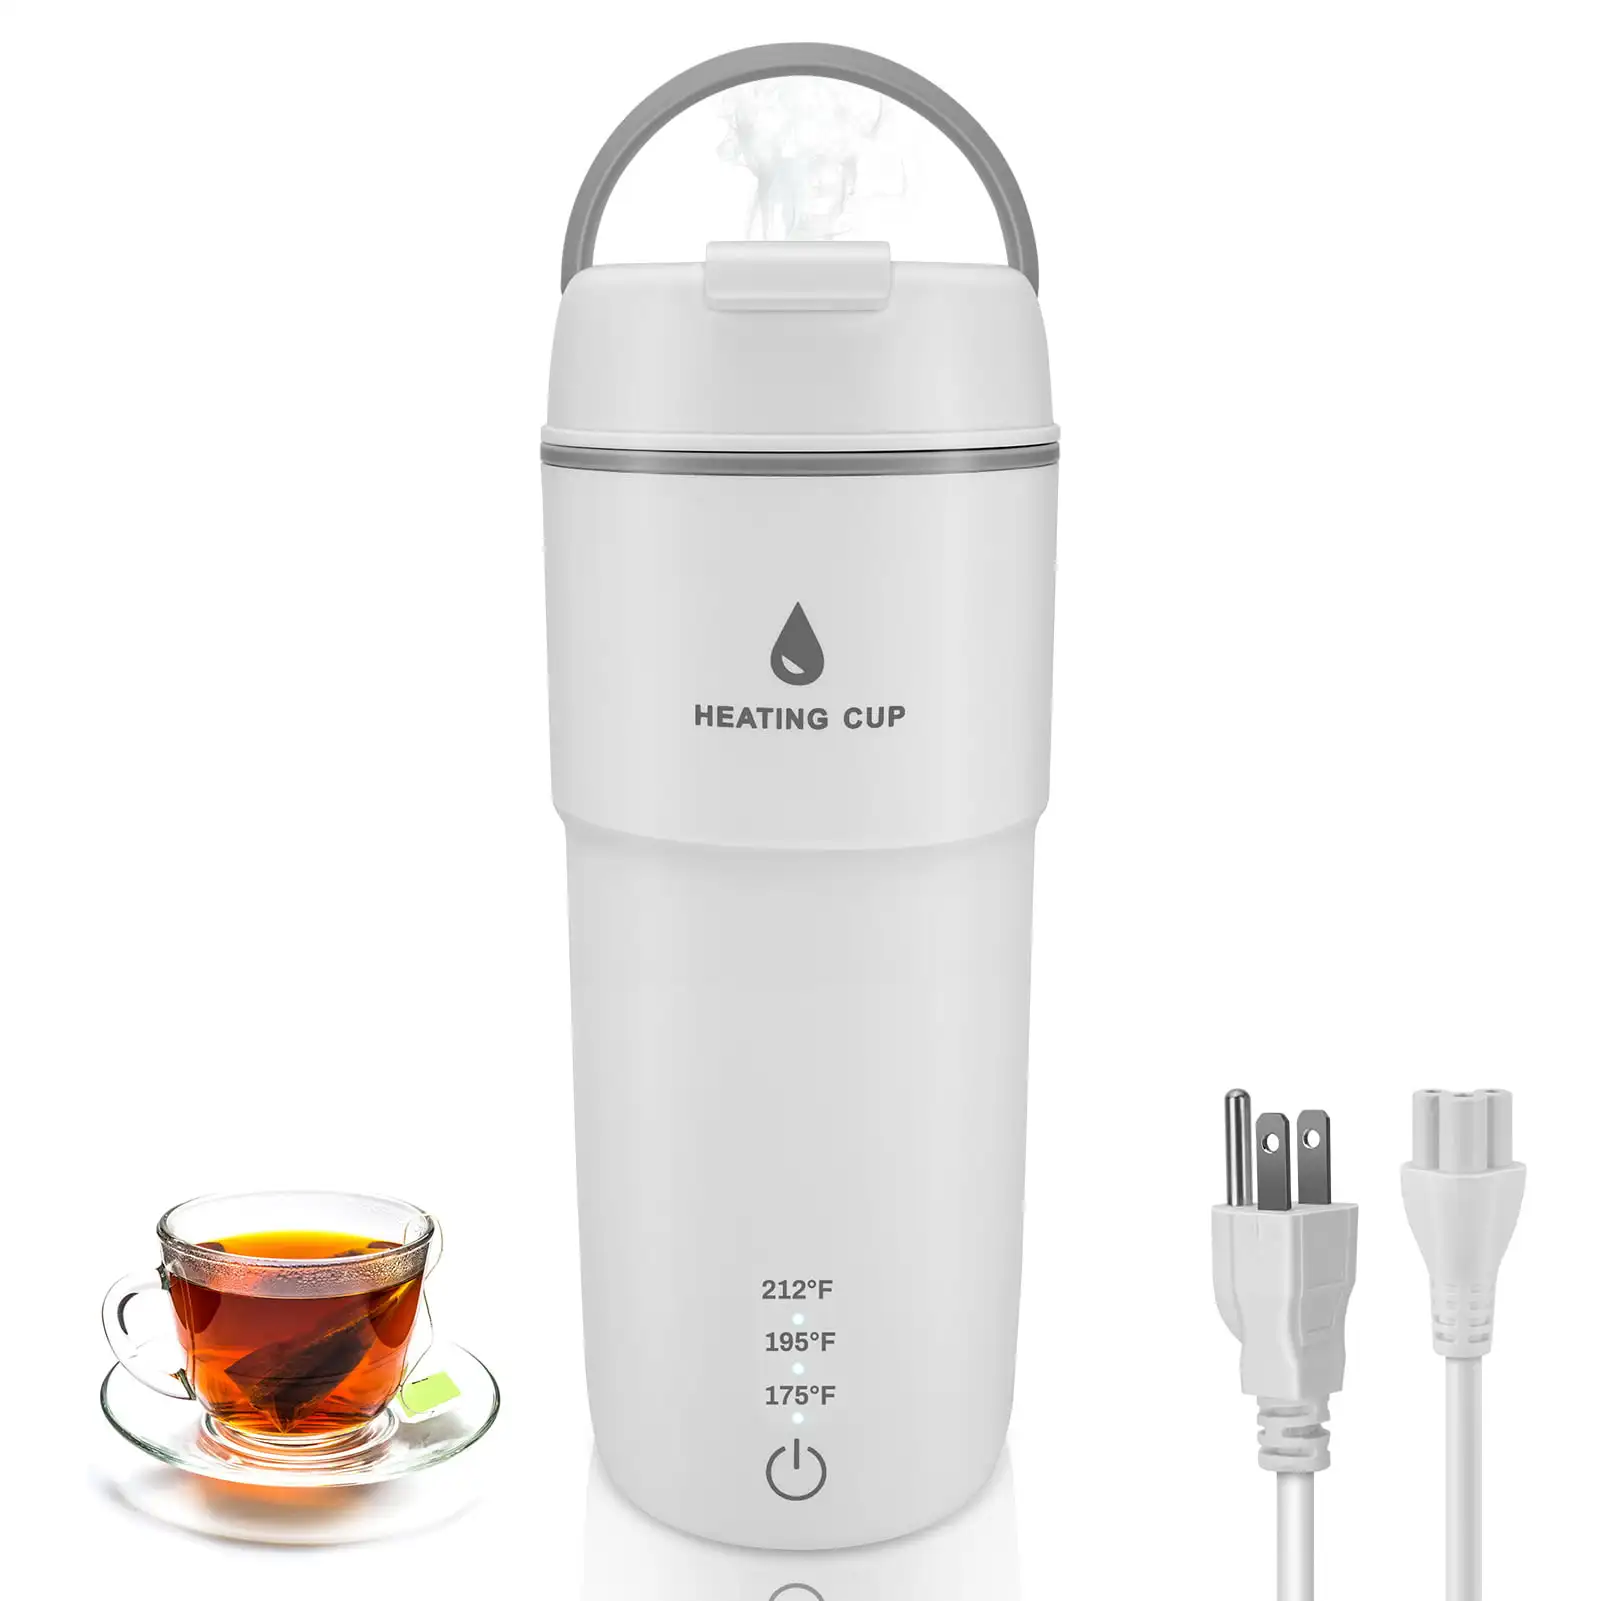 

Portable Kettle, Travel Tea Kettle Water Boiler Small Kettles for Boiling Water, 350ml Stainless Steel Fast Hot Water Maker He